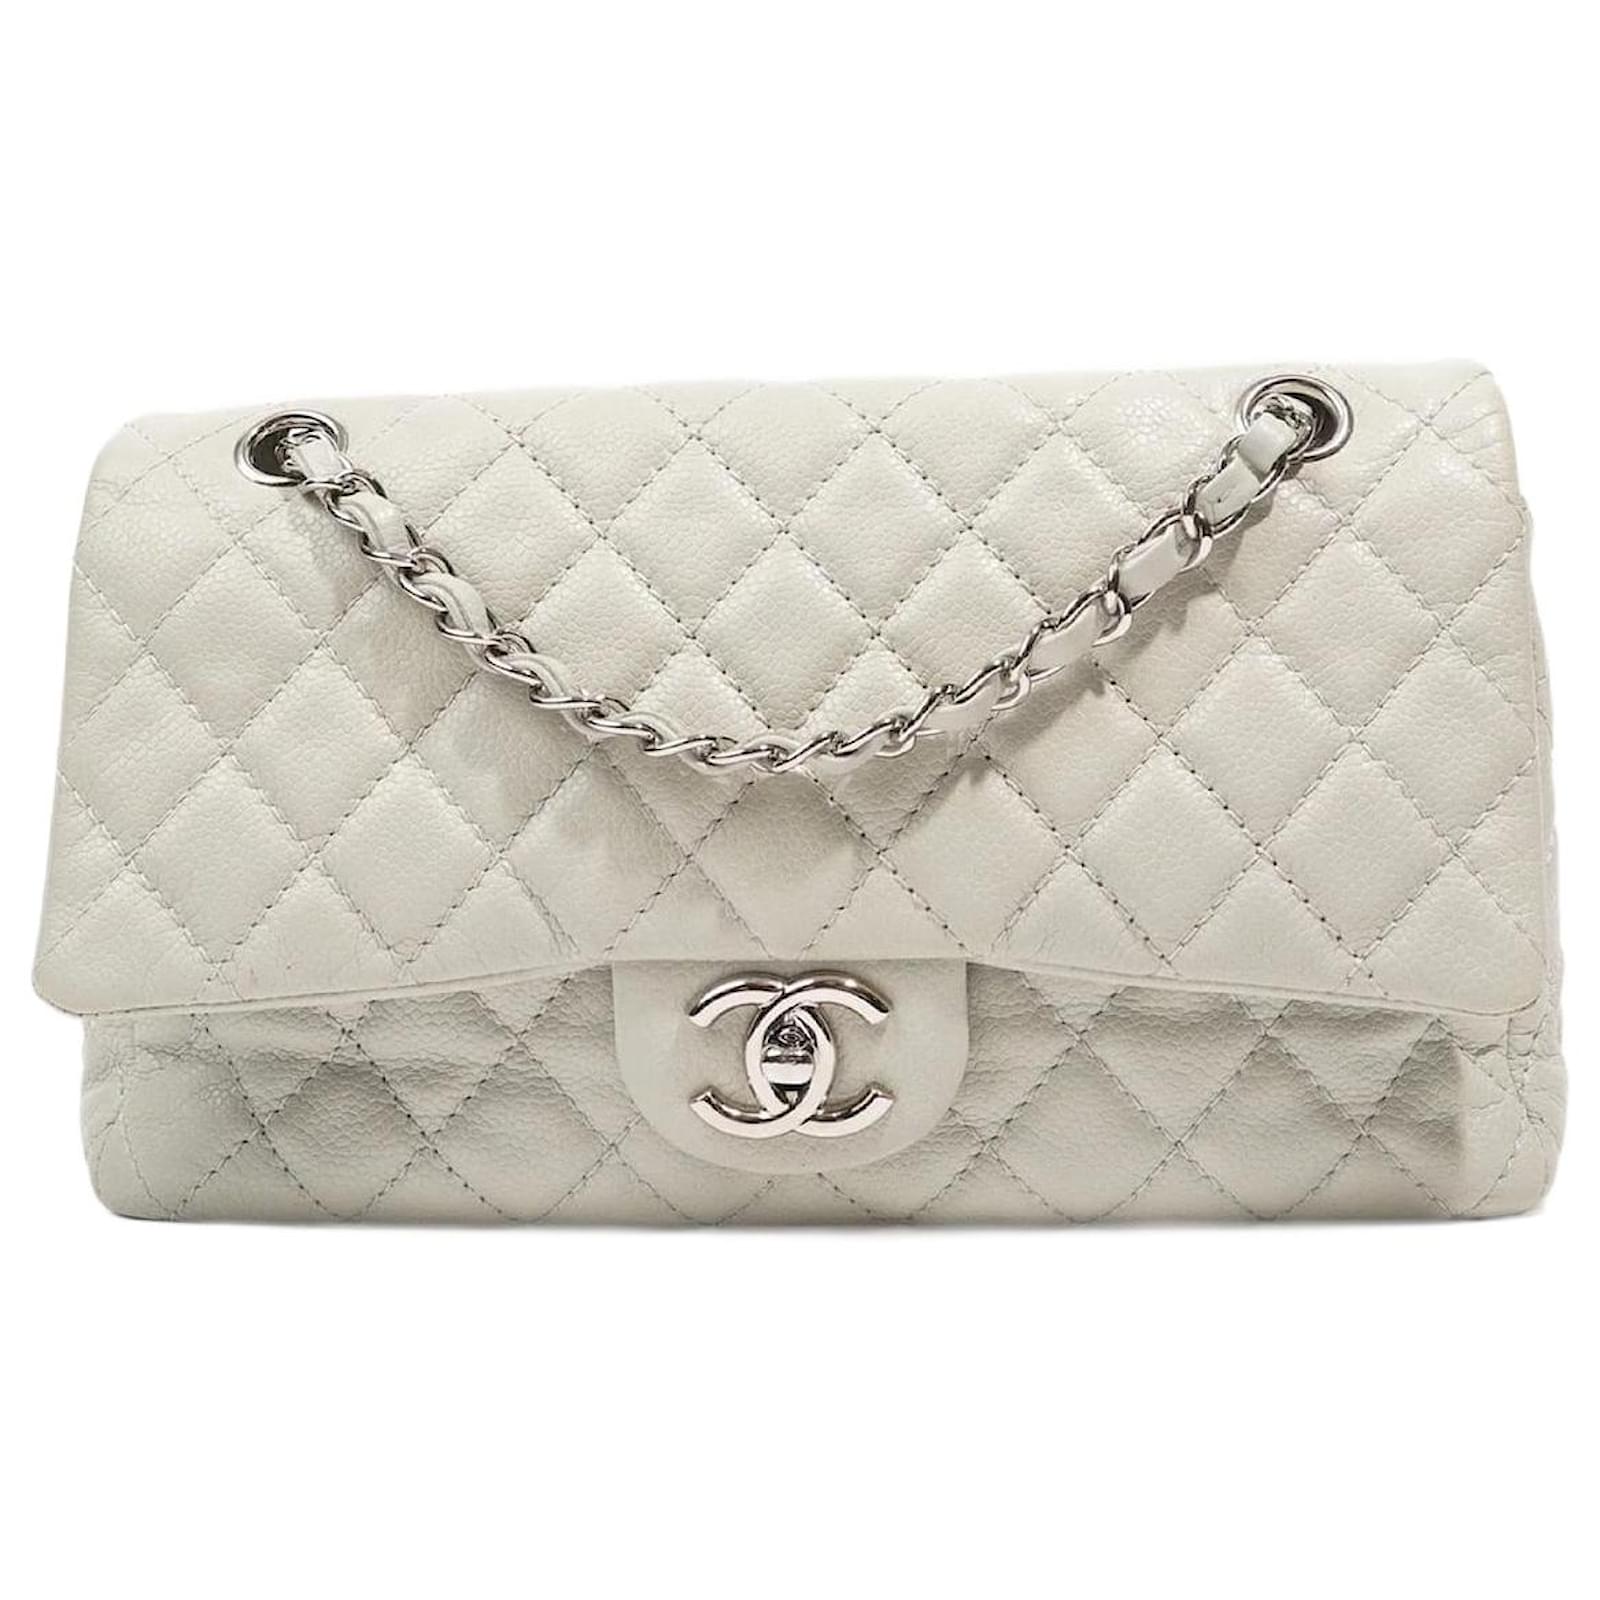 Chanel White Quilted Lambskin Leather Jumbo Classic Single Flap Bag Silver Hardware, 2008 (Very Good)-09